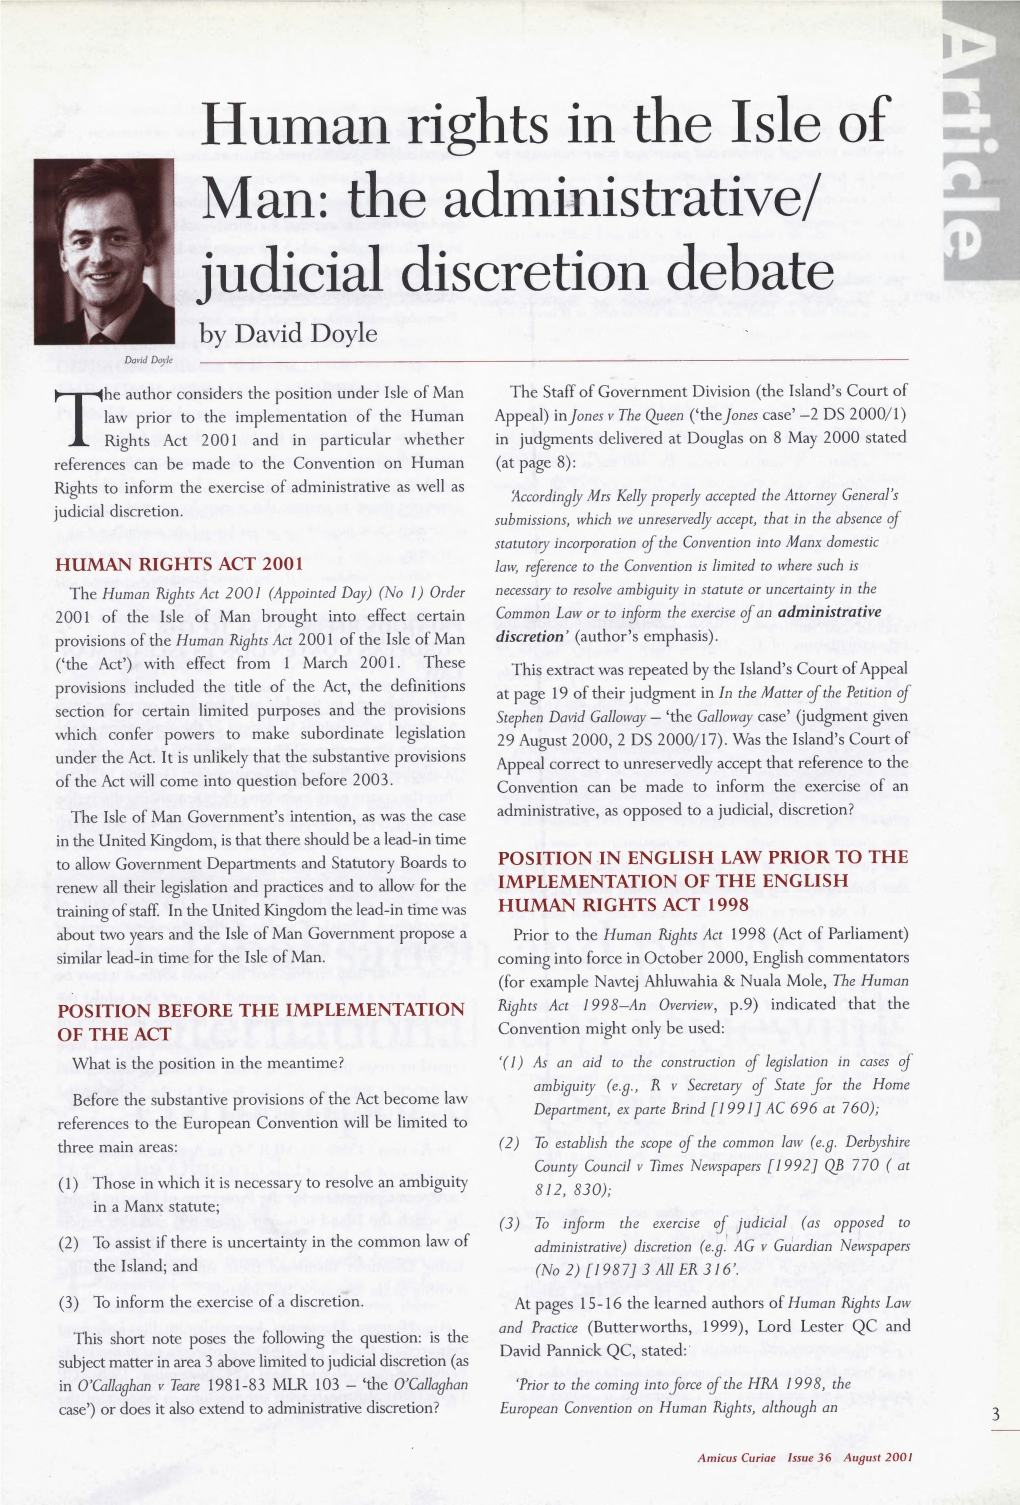 Human Rights in the Isle of Man: the Administrative/ Judicial Discretion Debate by David Doyle David Doyle